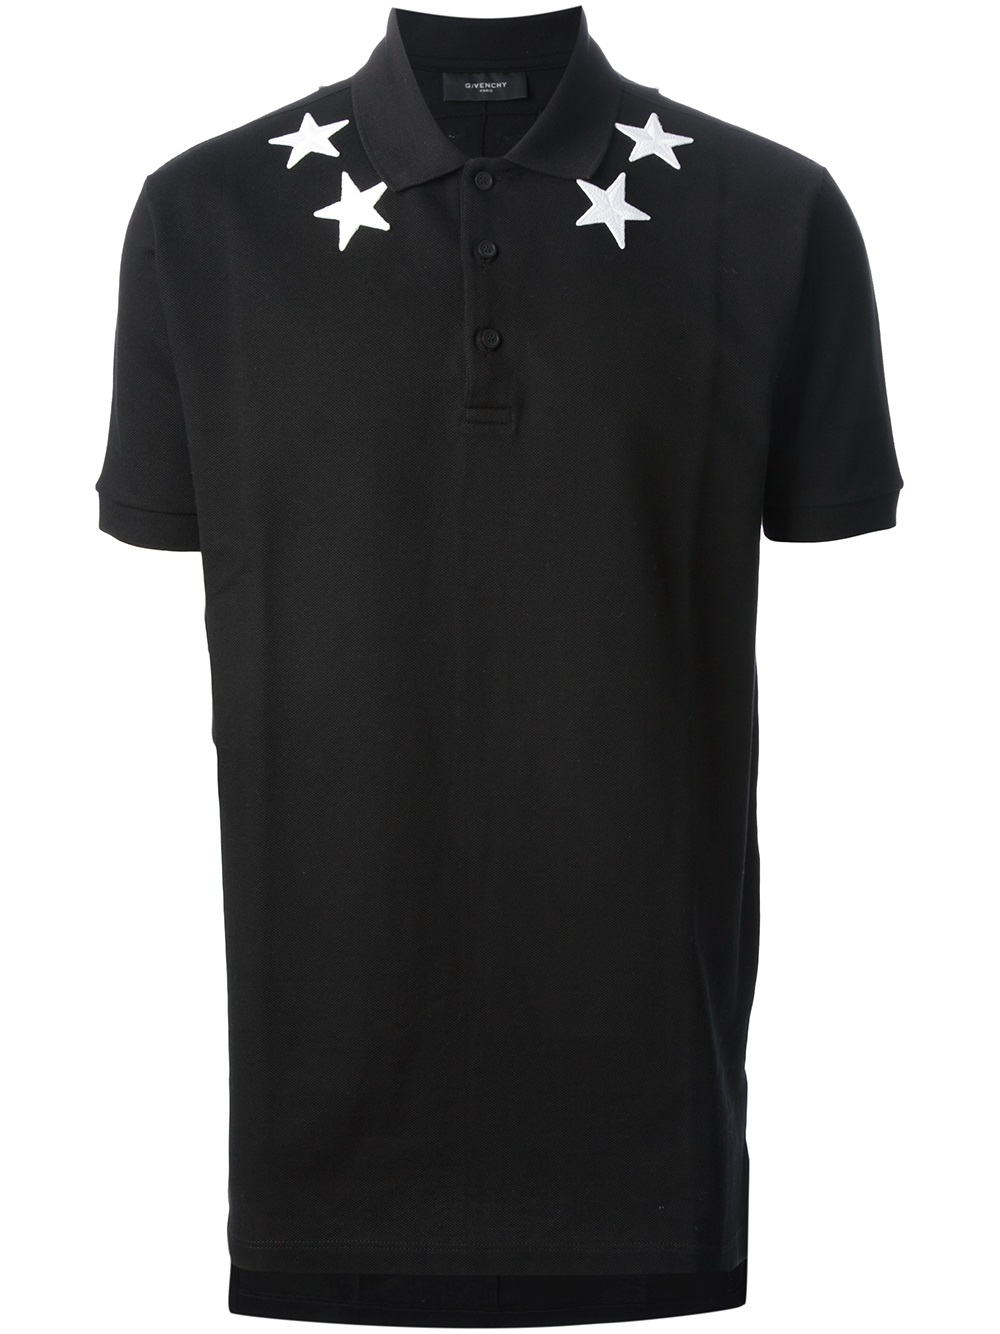 Givenchy Classic Polo Shirt in Black for Men - Lyst